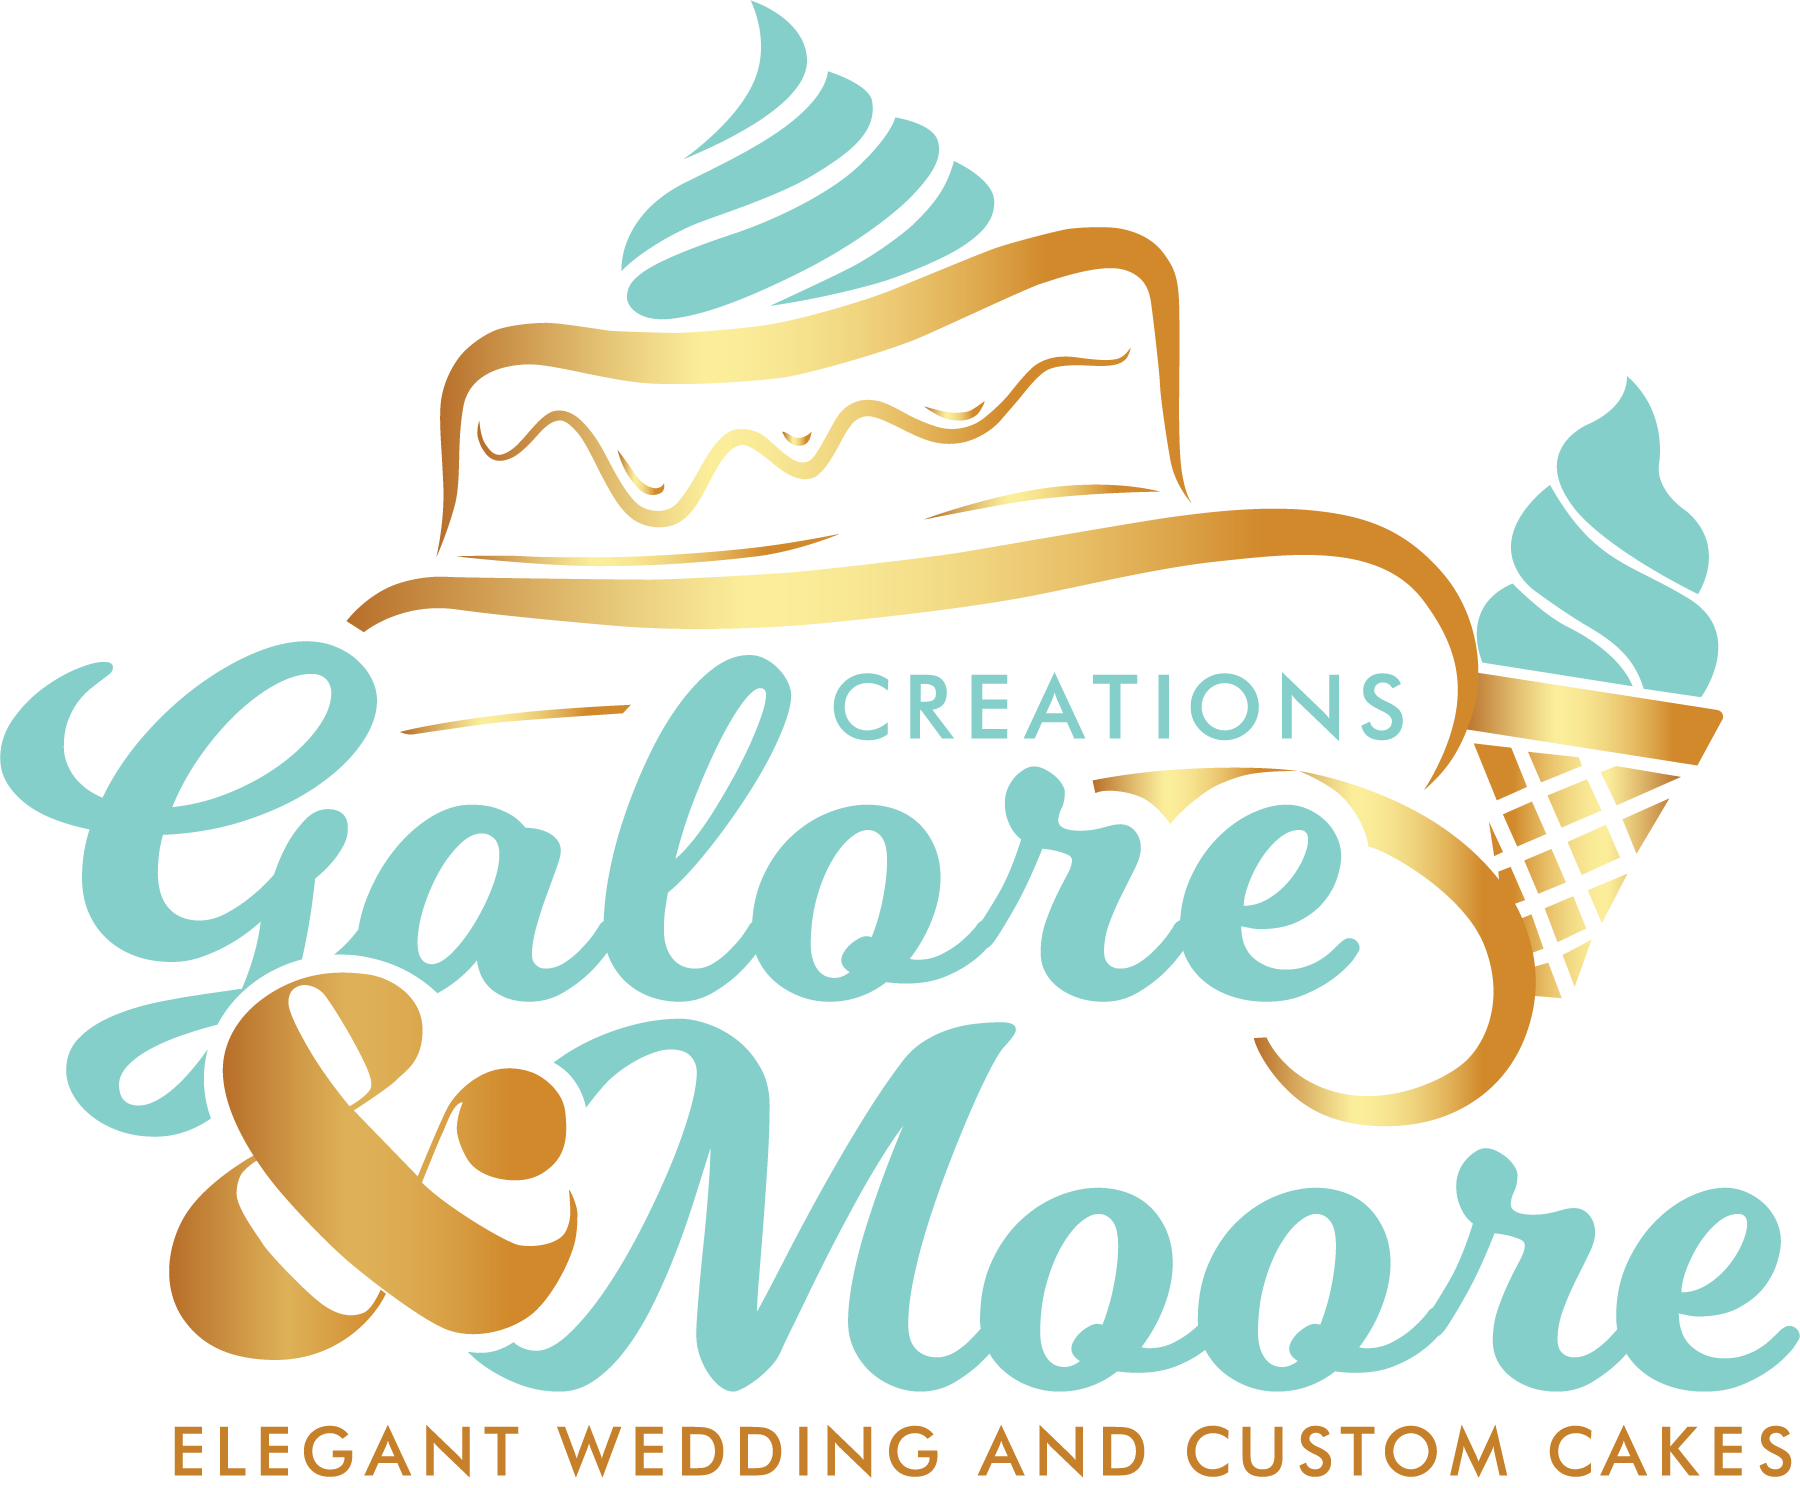 Creations Galore and Moore